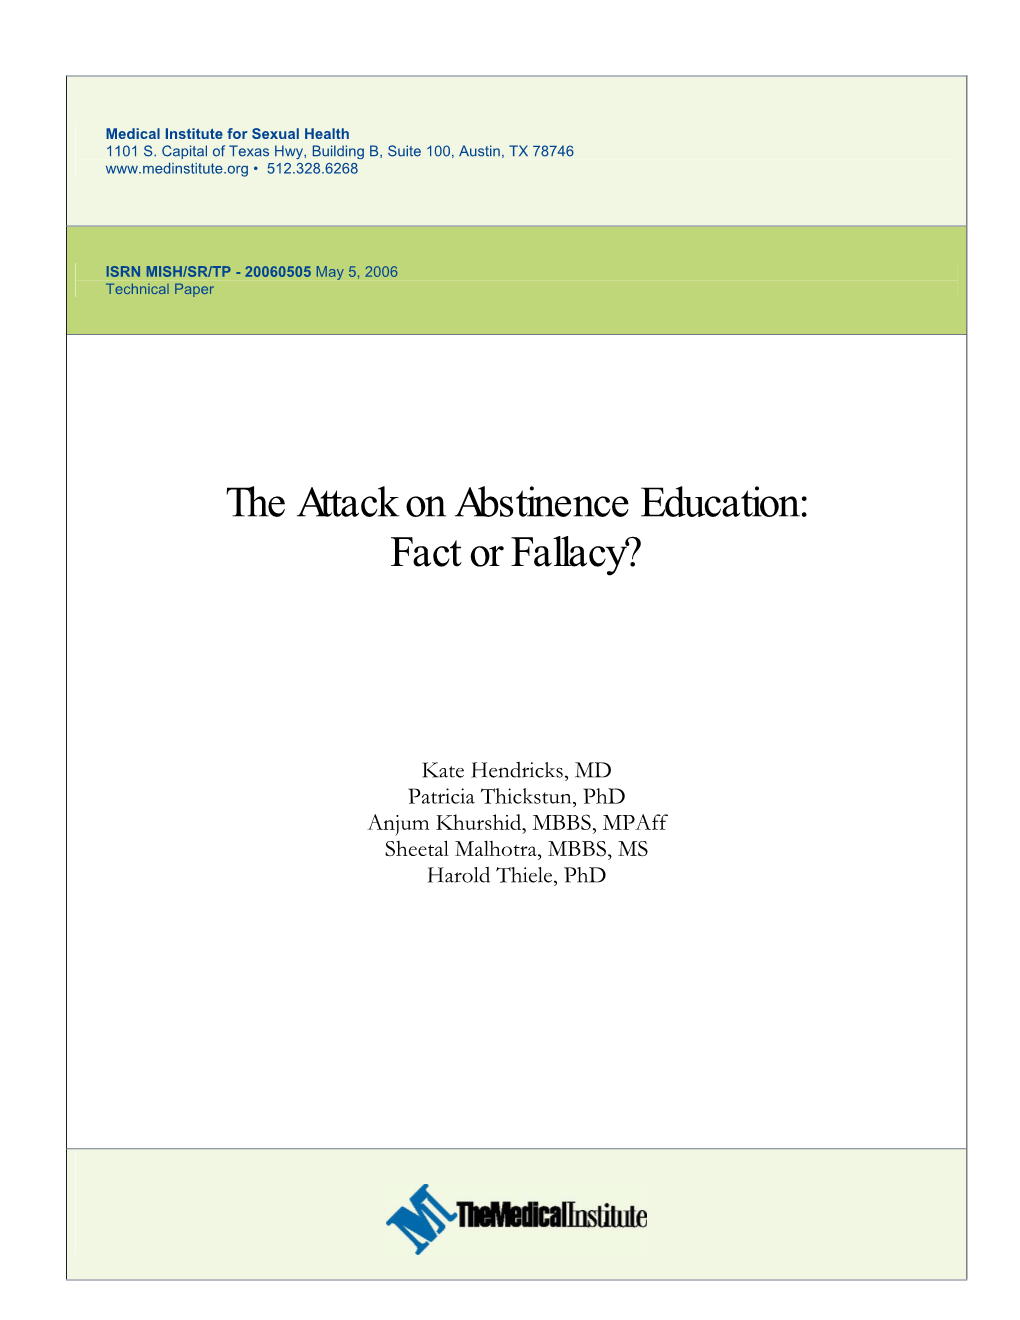 The Attack on Abstinence Education: Fact Or Fallacy?